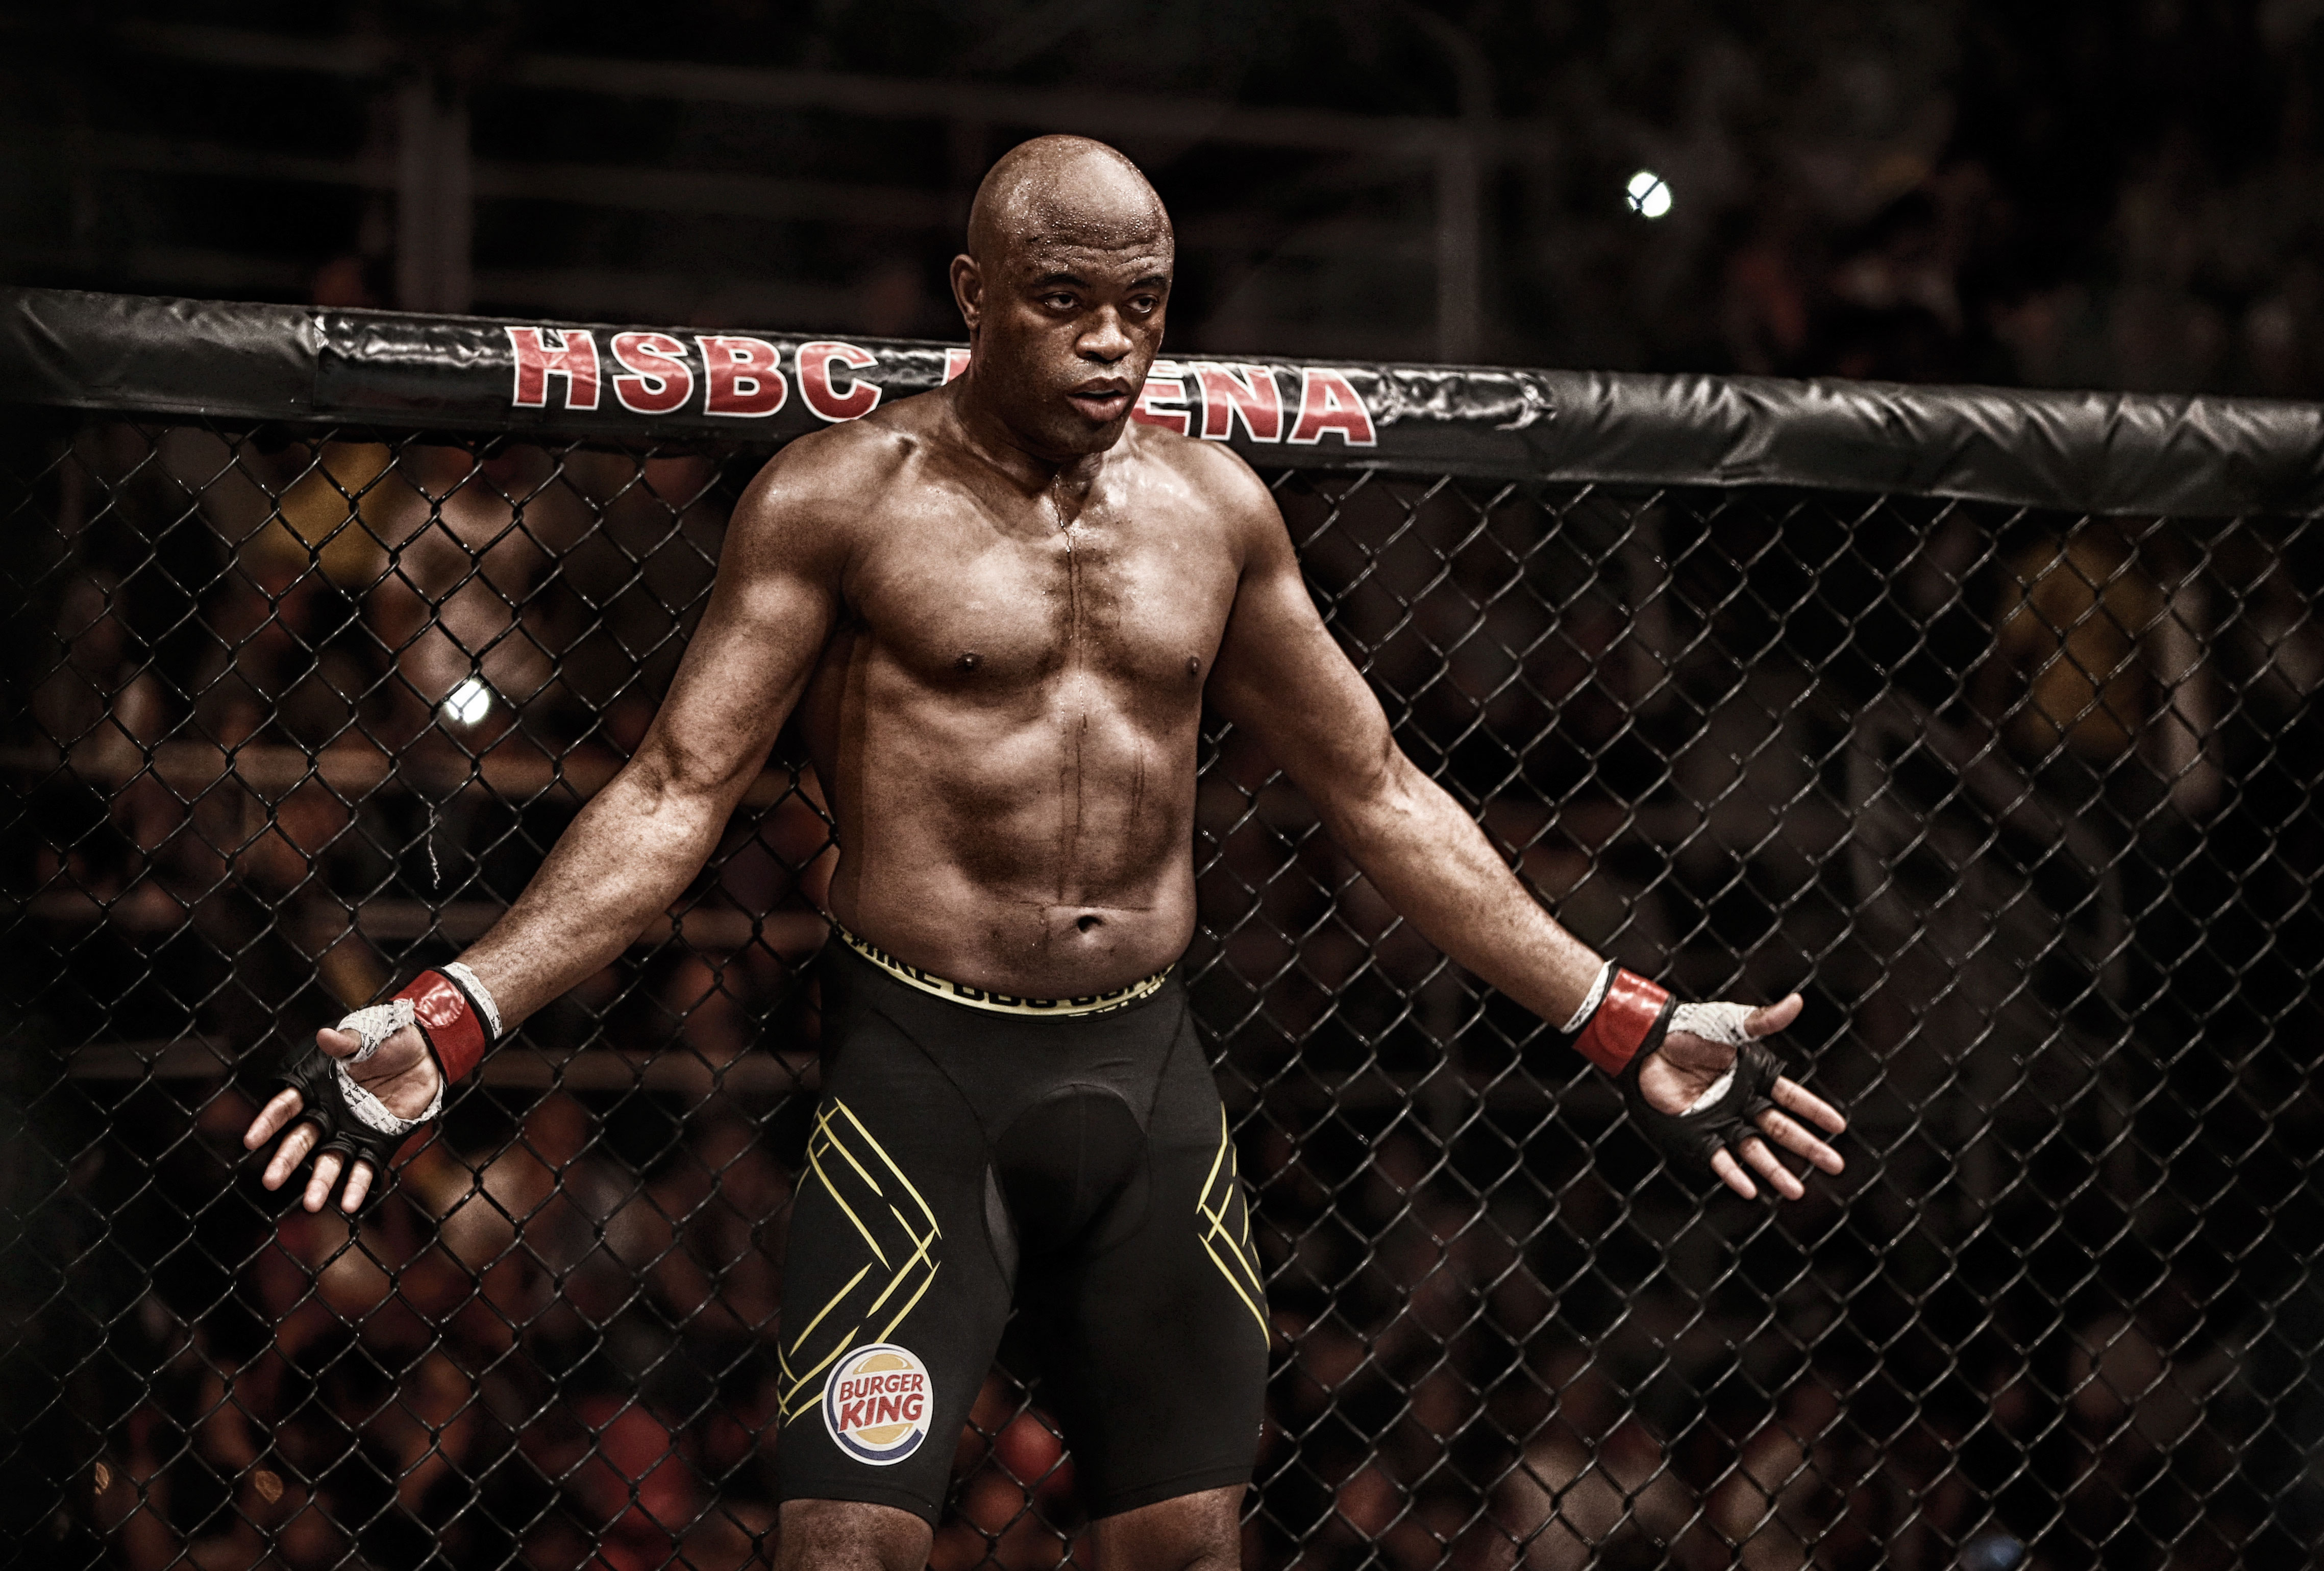 Anderson Silva named the most difficult opponent of his career
